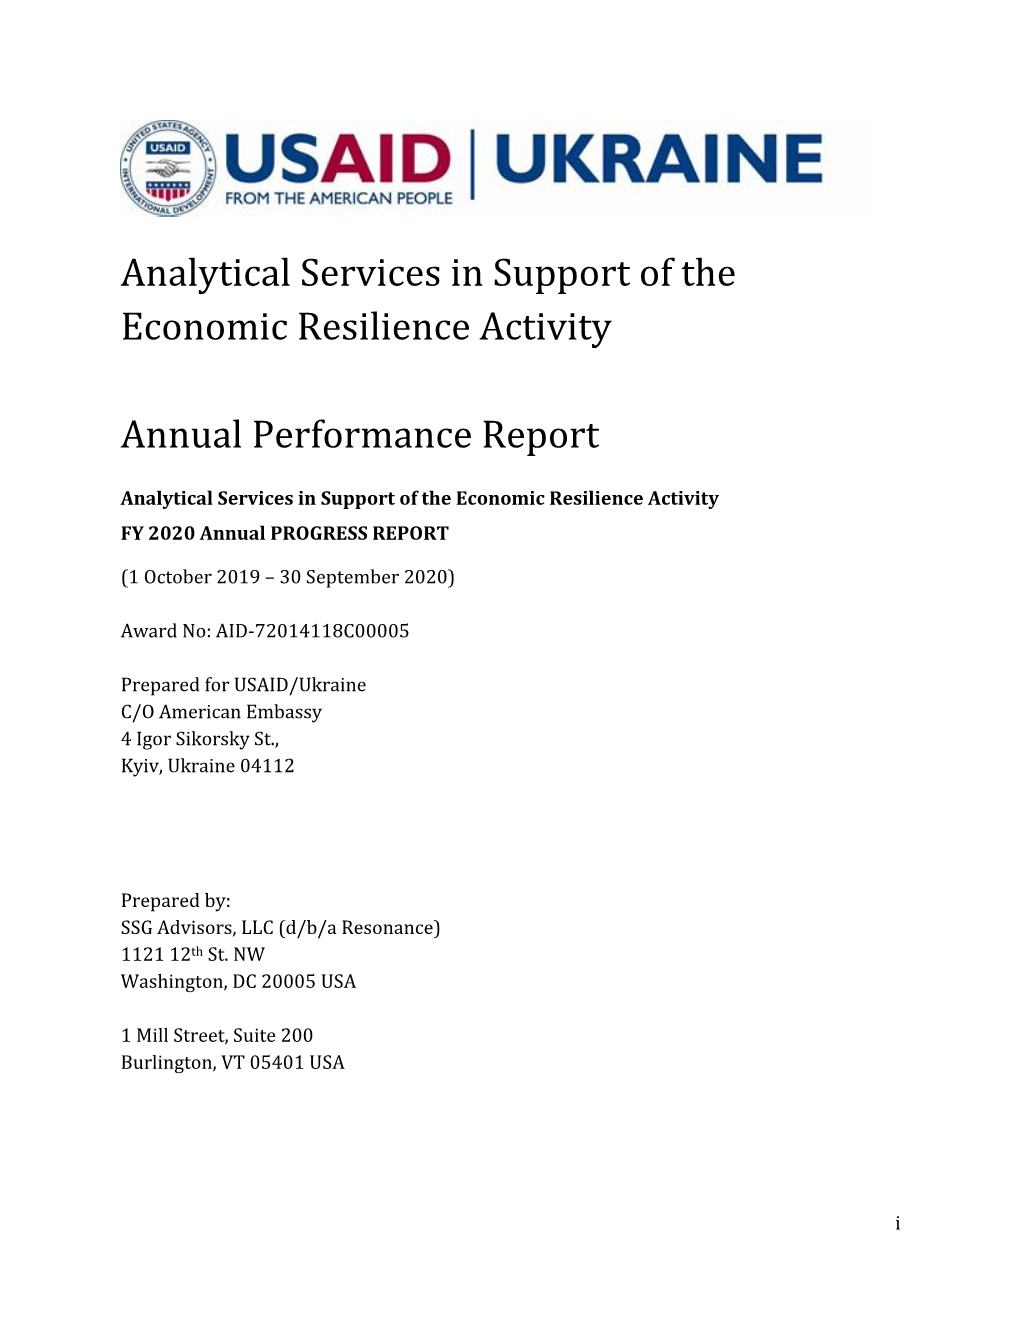 Analytical Services in Support of the Economic Resilience Activity